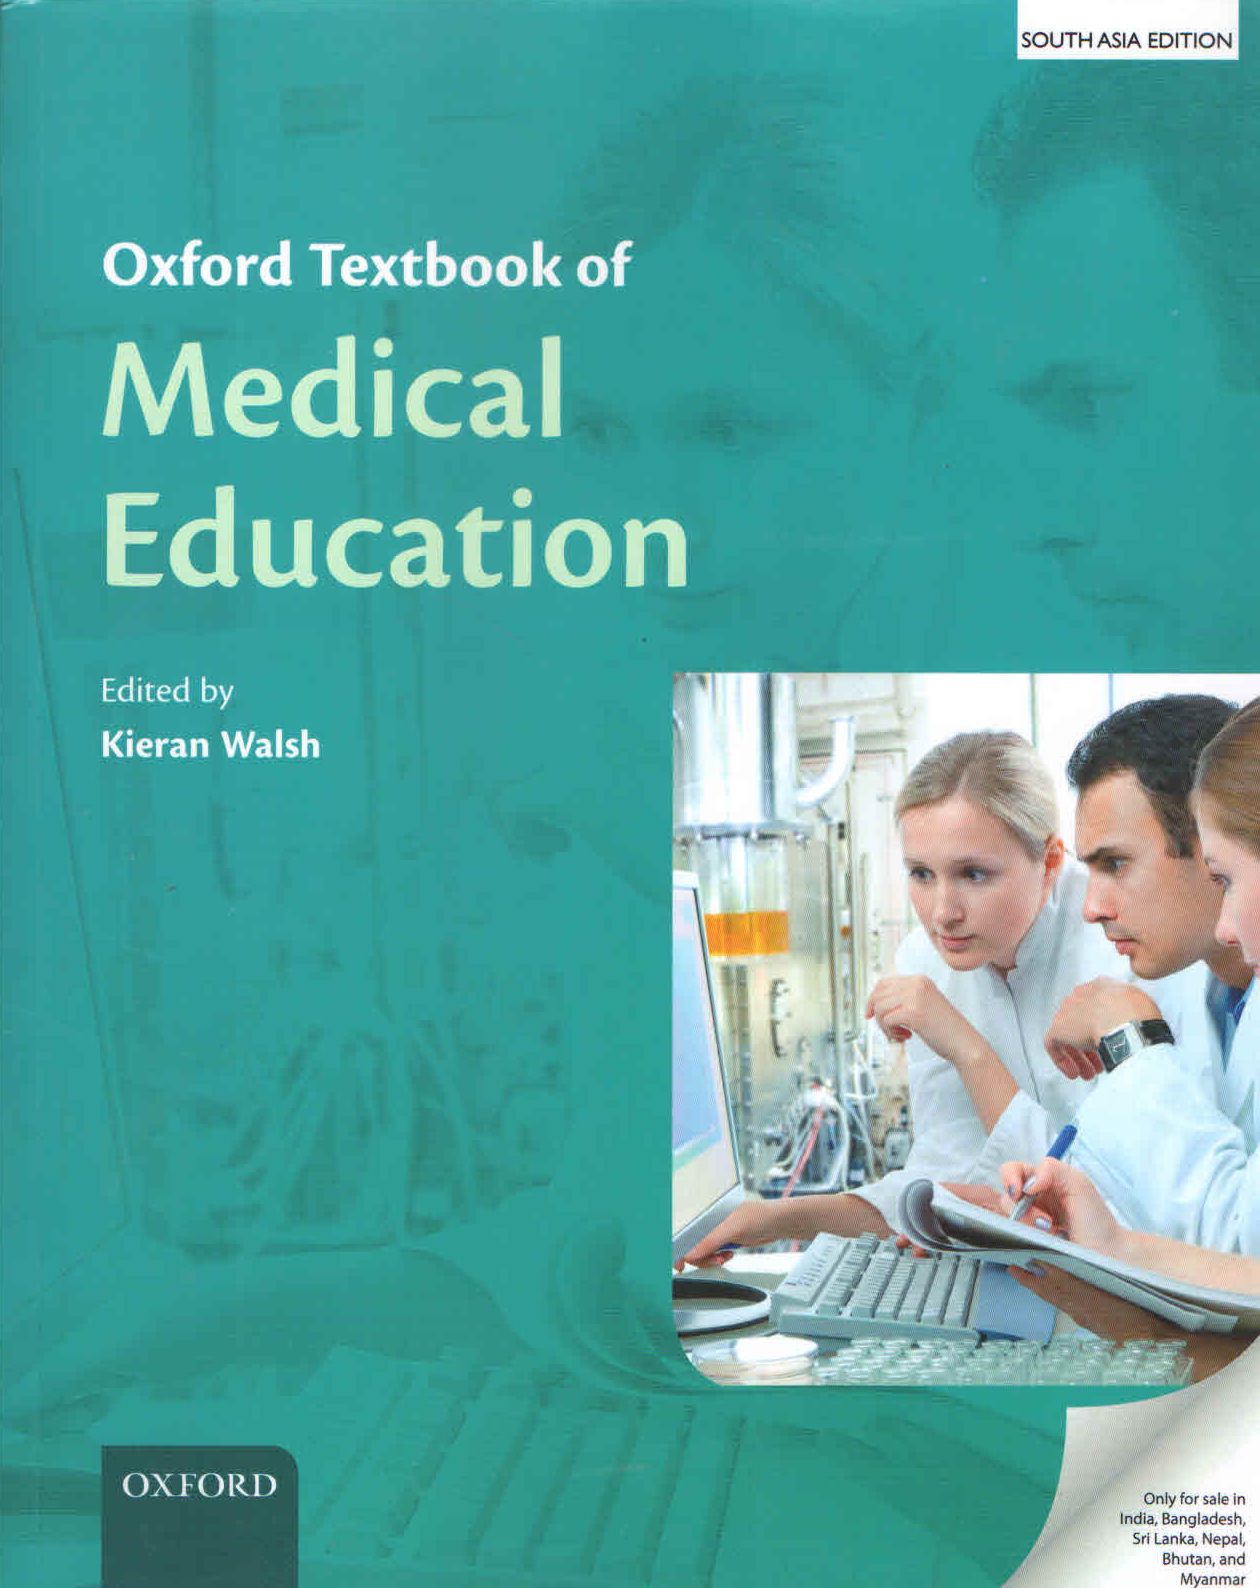 

exclusive-publishers/oxford-university-press/oxford-textbook-of-medical-education-9780198824190